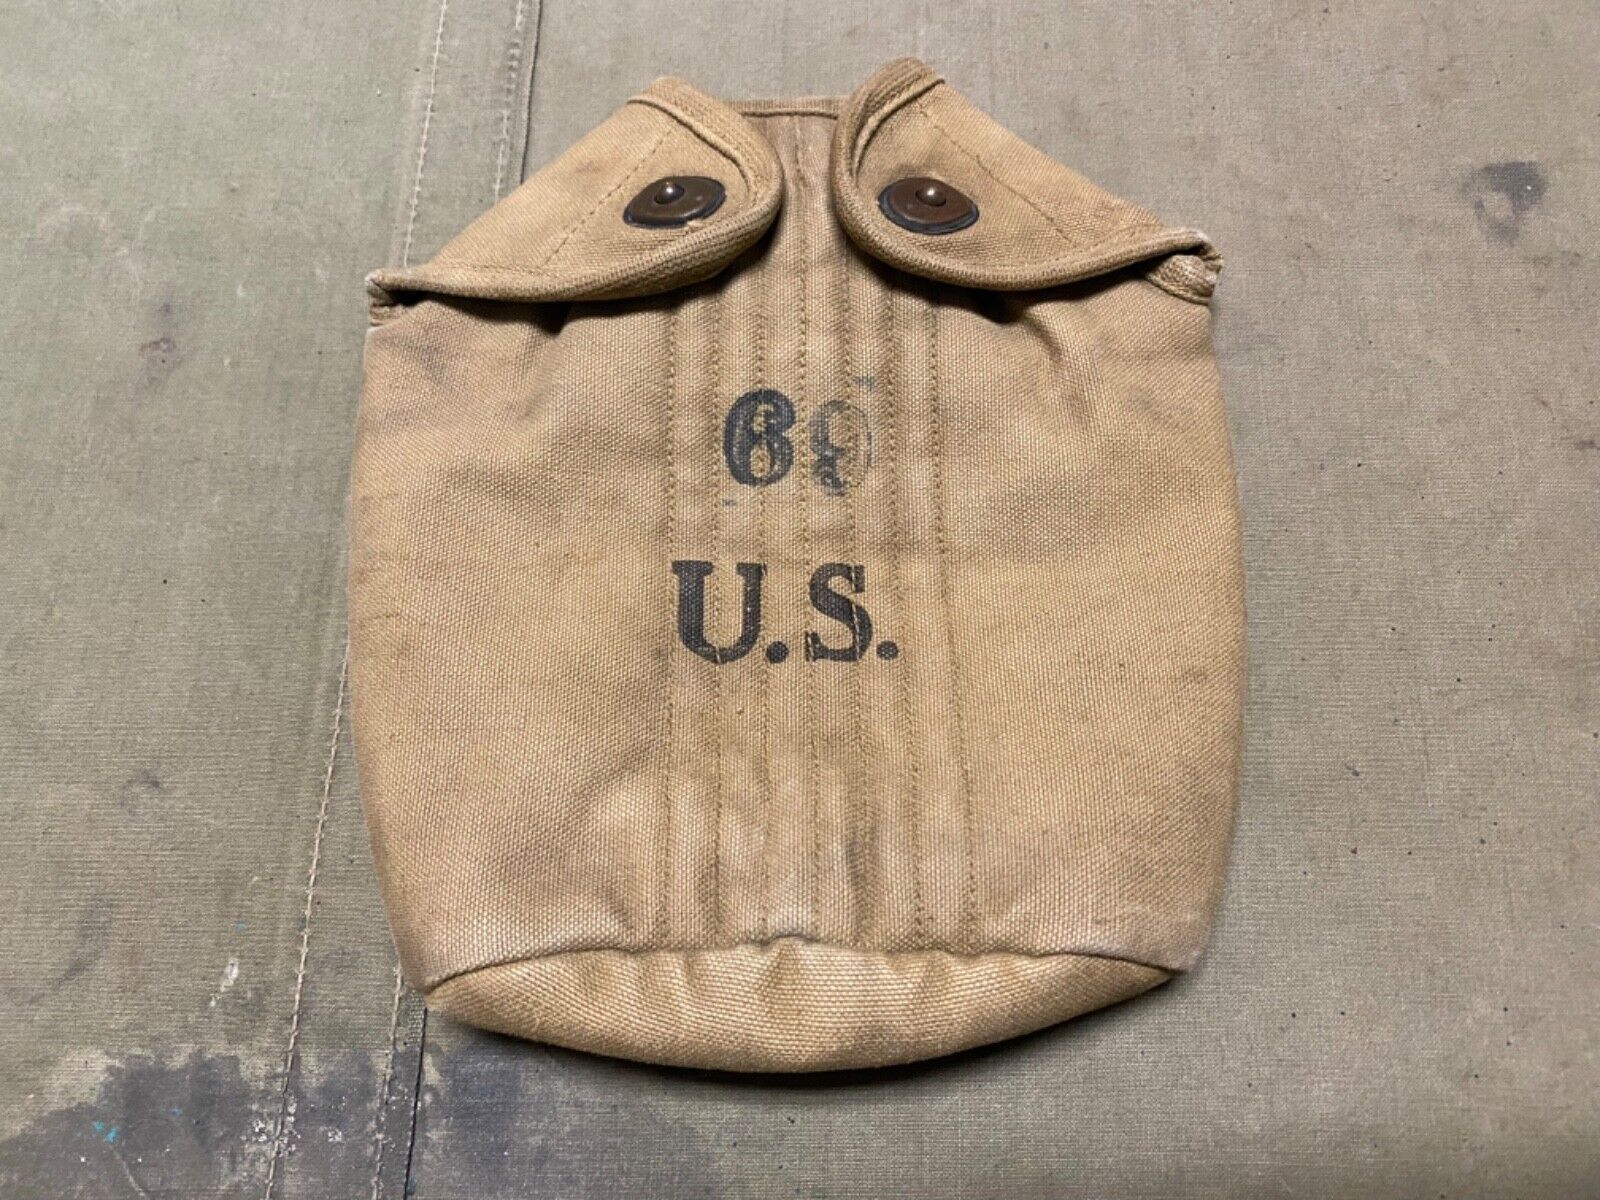 ORIGINAL WWI WWII US ARMY M1910 CANTEEN CARRIER COVER-DATED:1917